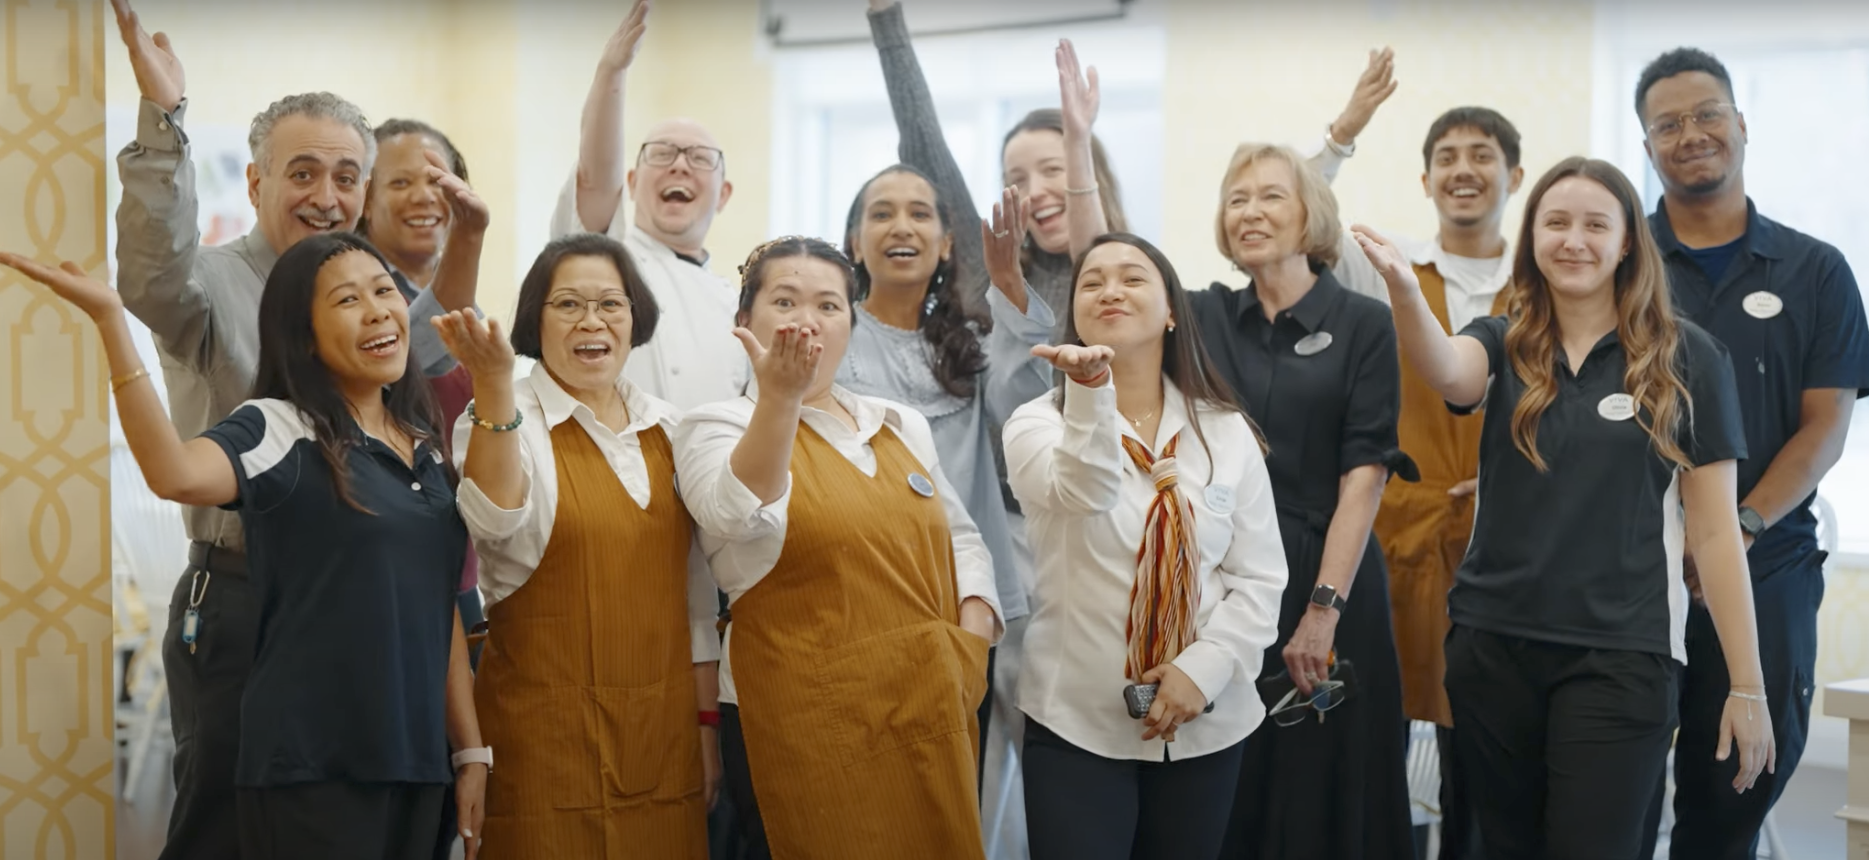 A group of senior living employees smiling for the camera and holding out hands in a welcoming way.